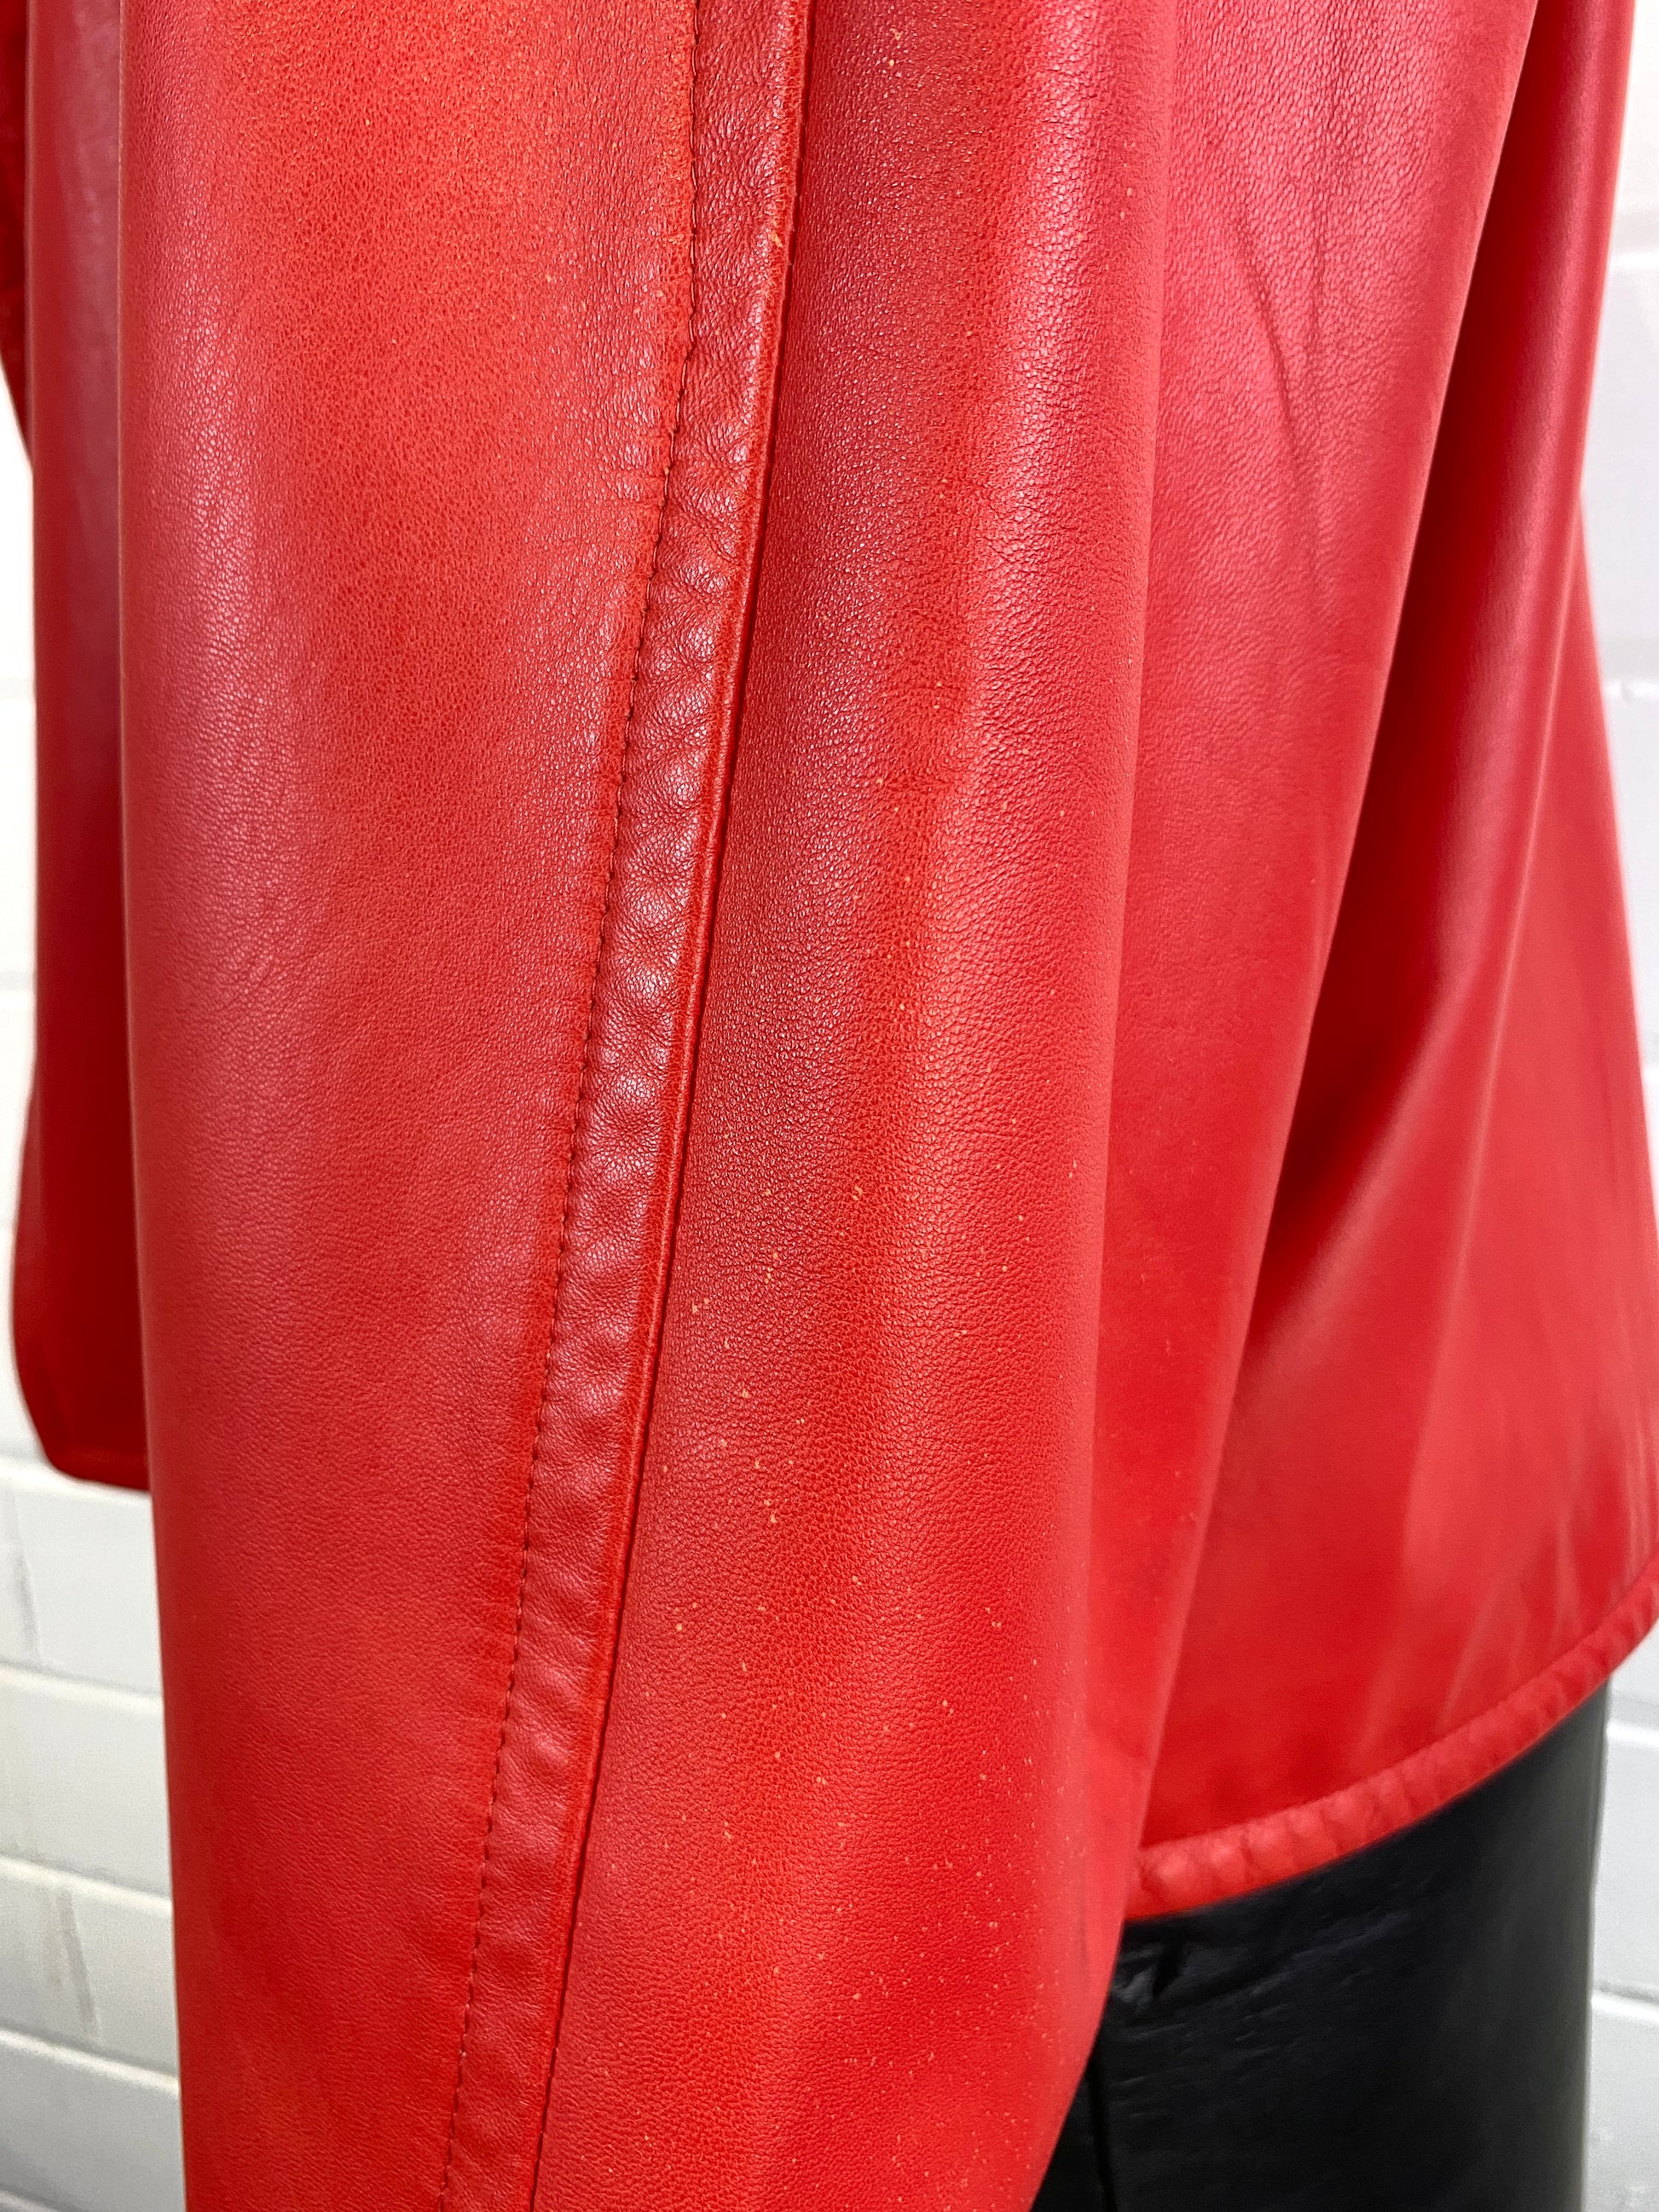 Vintage 1980s Red Leather Cropped Jacket, Large